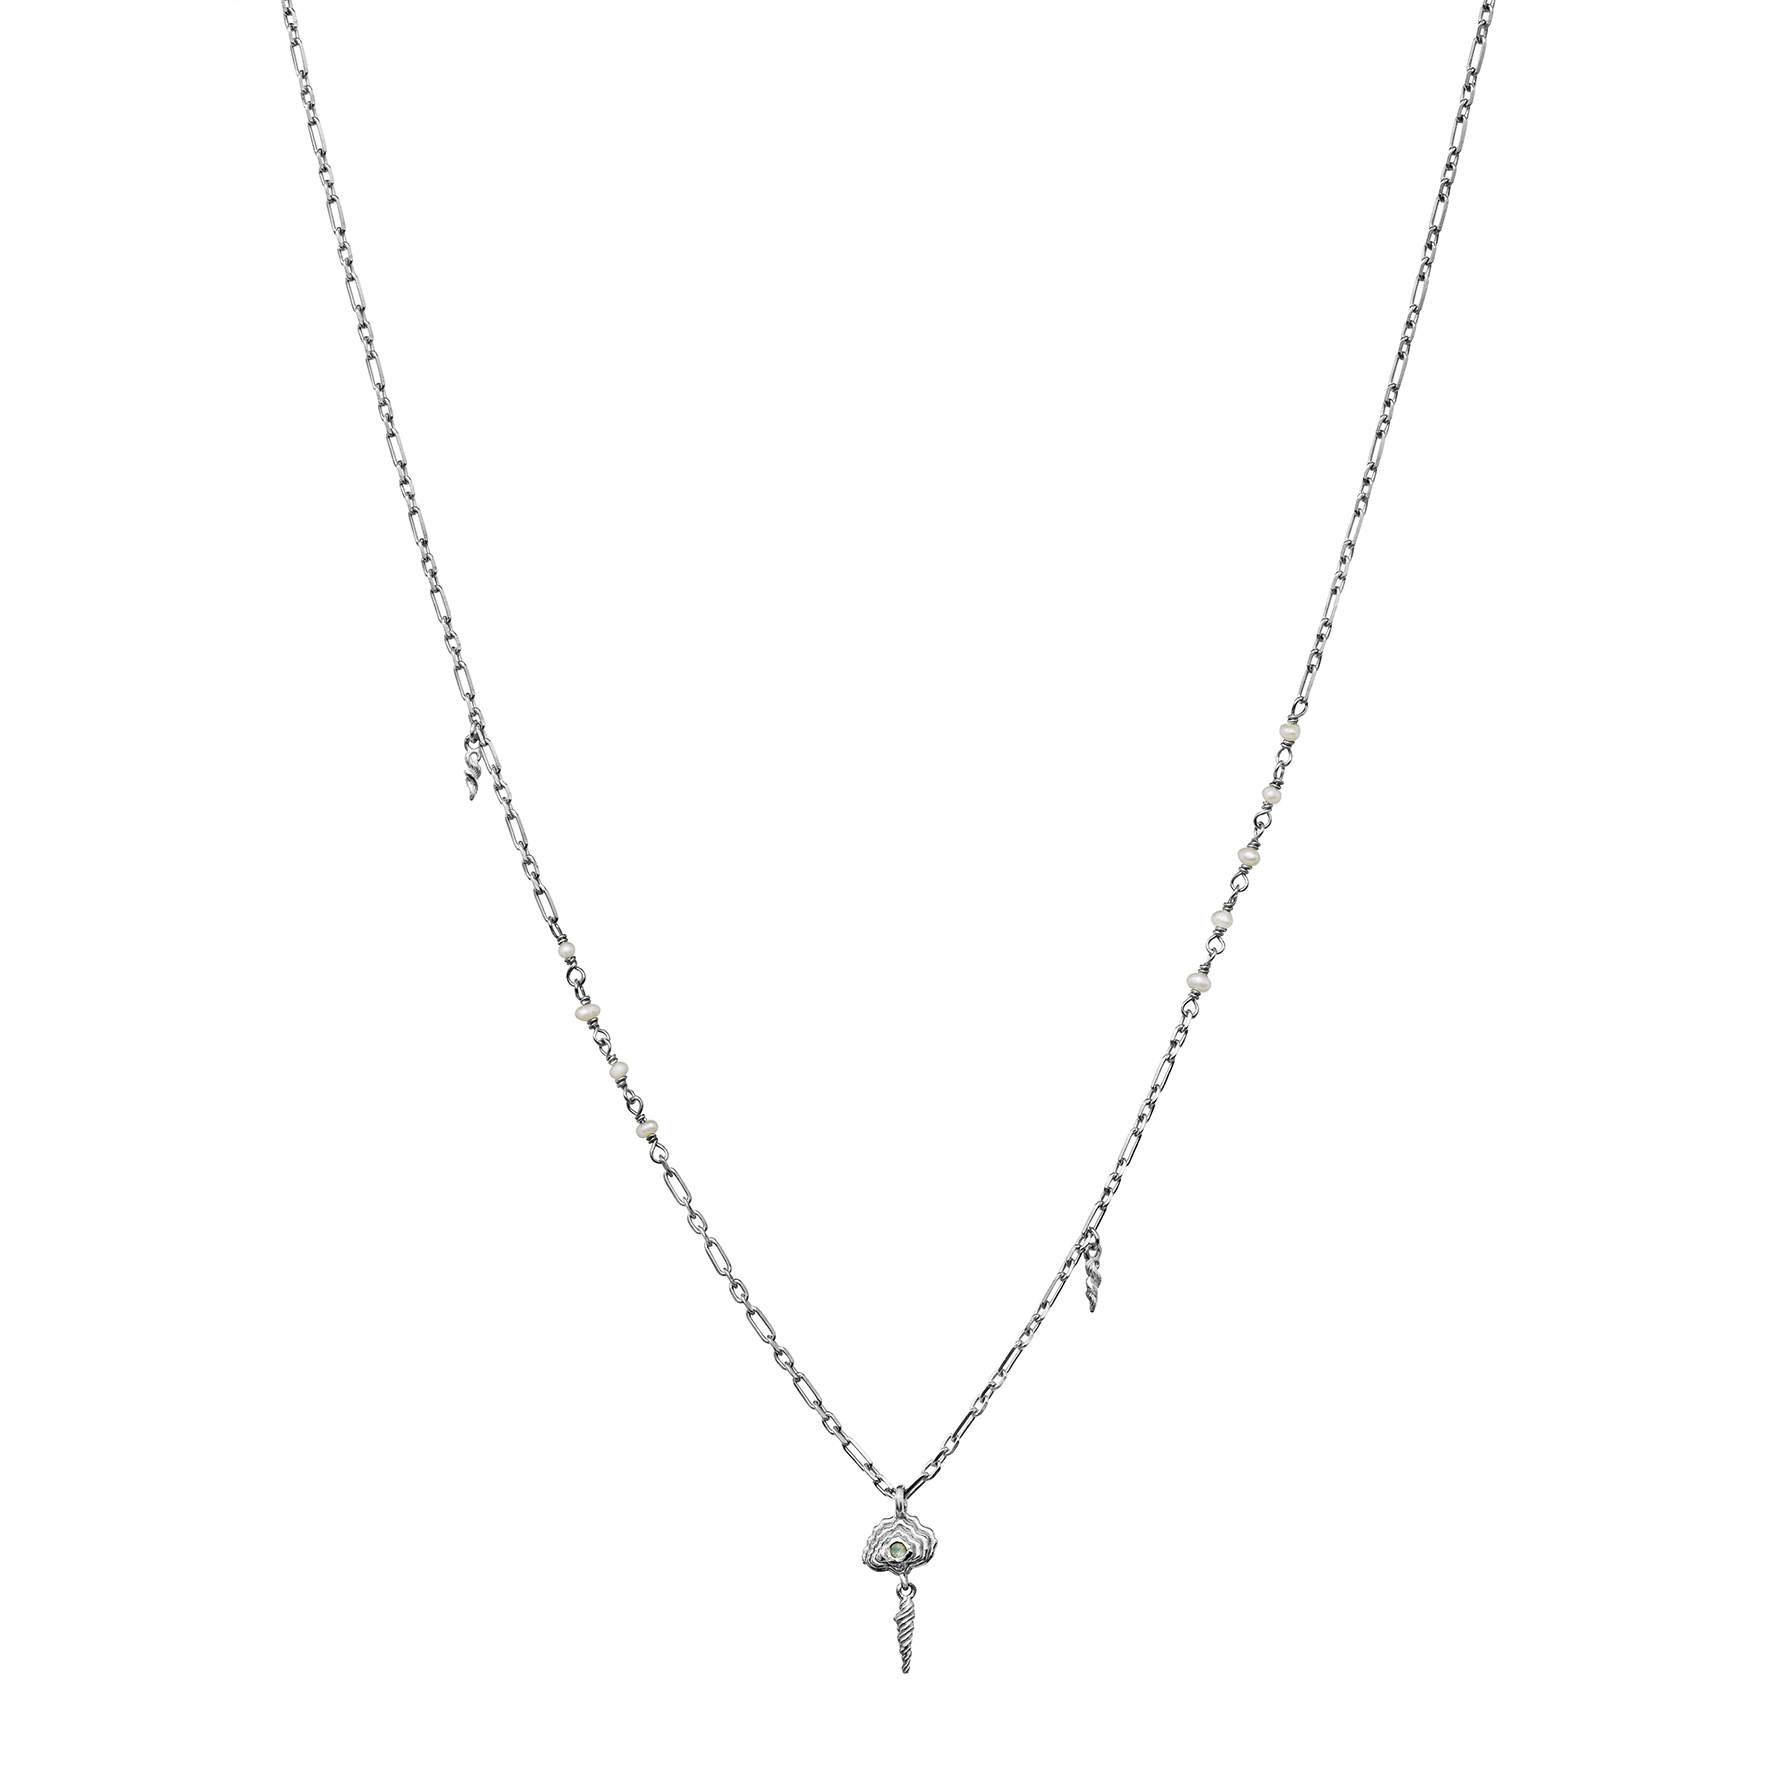 Ivi Necklace from Maanesten in Silver Sterling 925